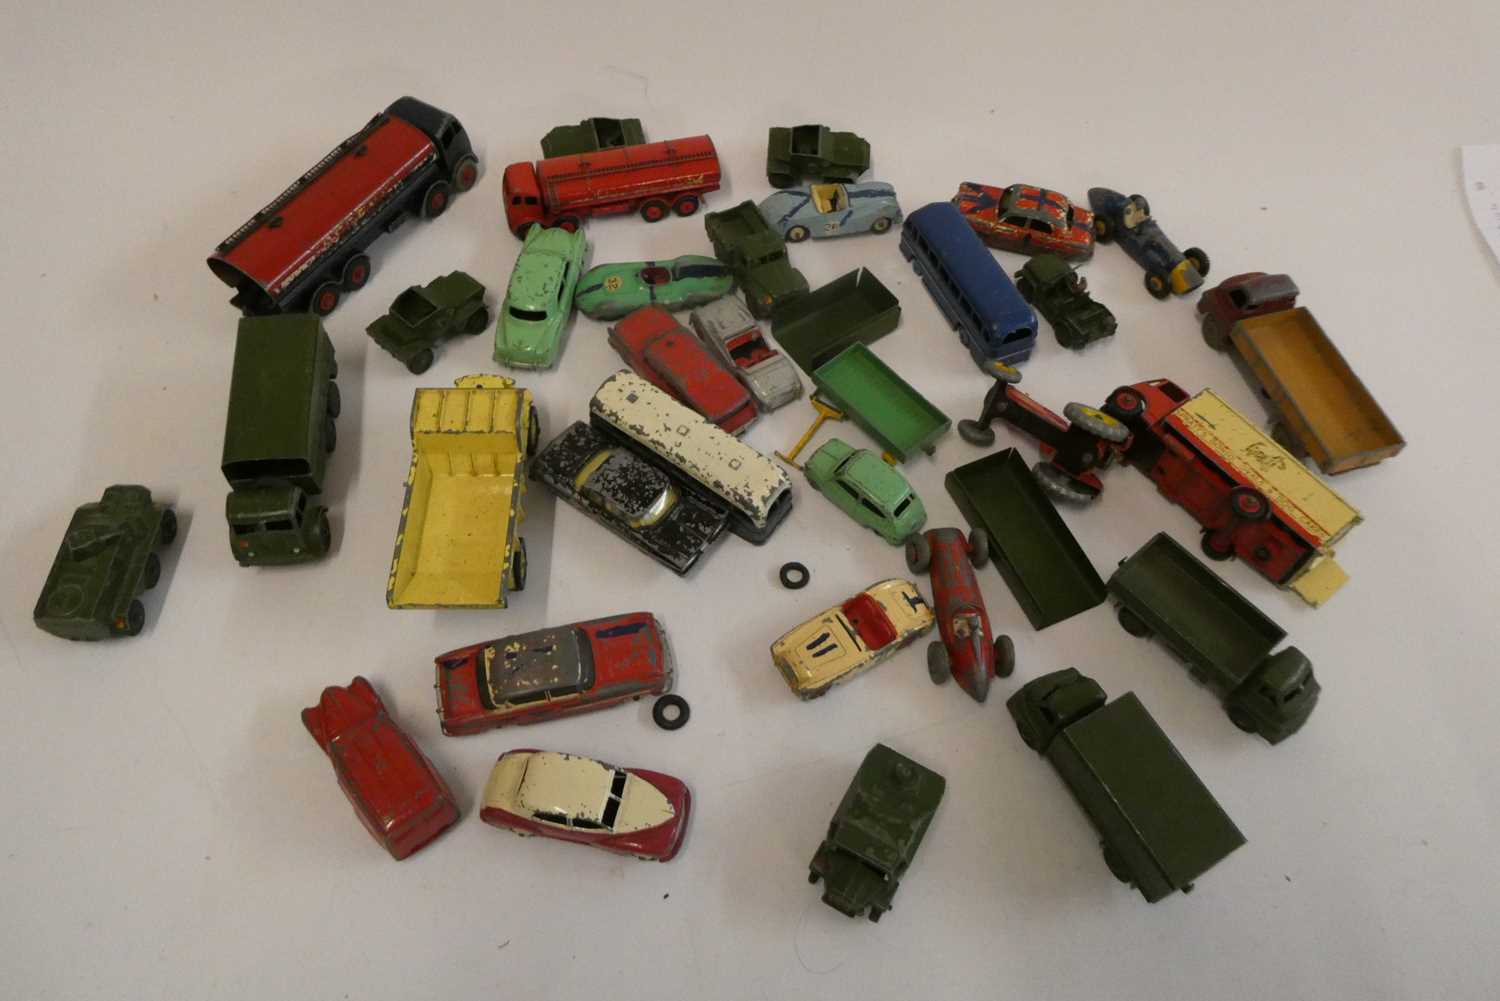 Playworn Dinky vehicles including cars, trucks, army vehicles and race cars, most items have paint